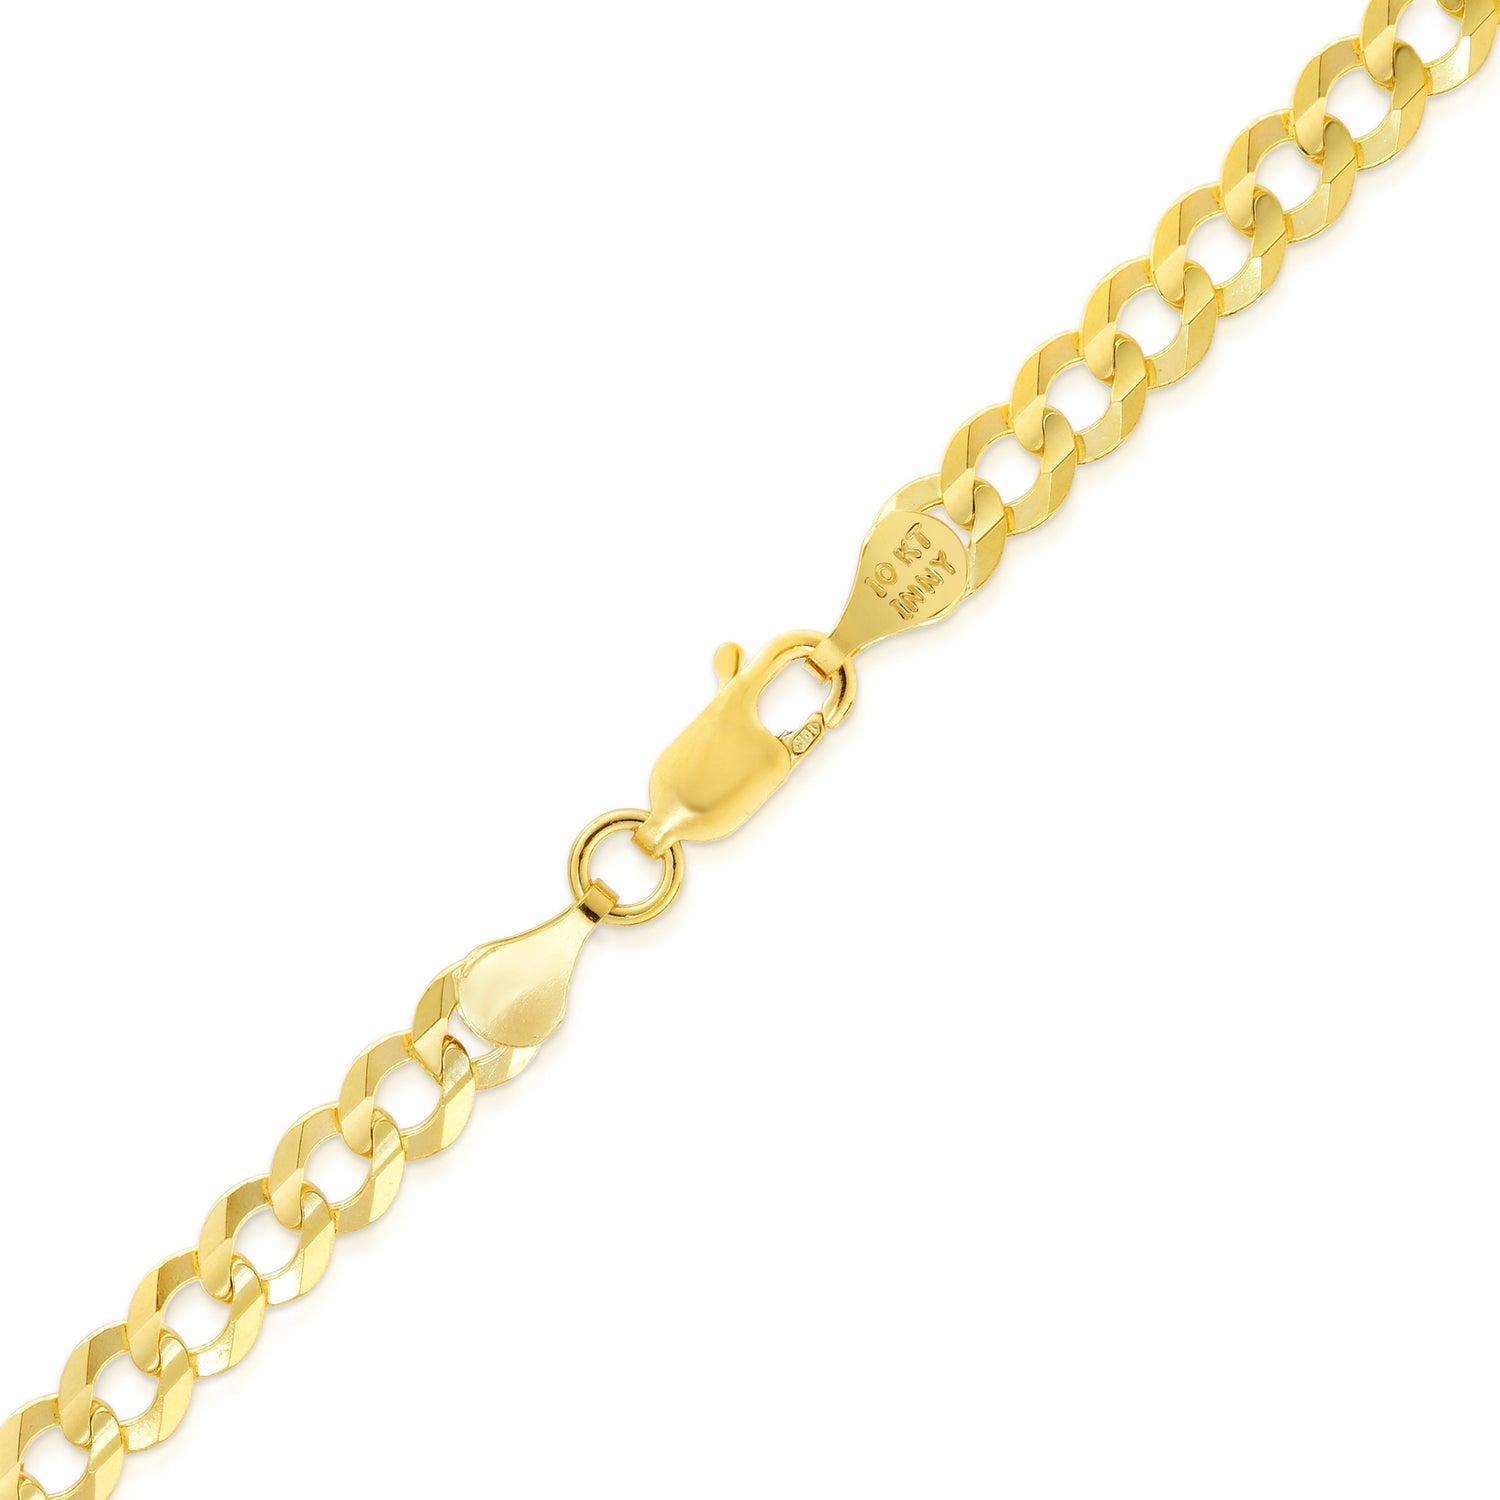 10k Yellow Gold Mens Thick Solid Curb Cuban Bracelet and Anklet, 0.3 Inch (7mm)